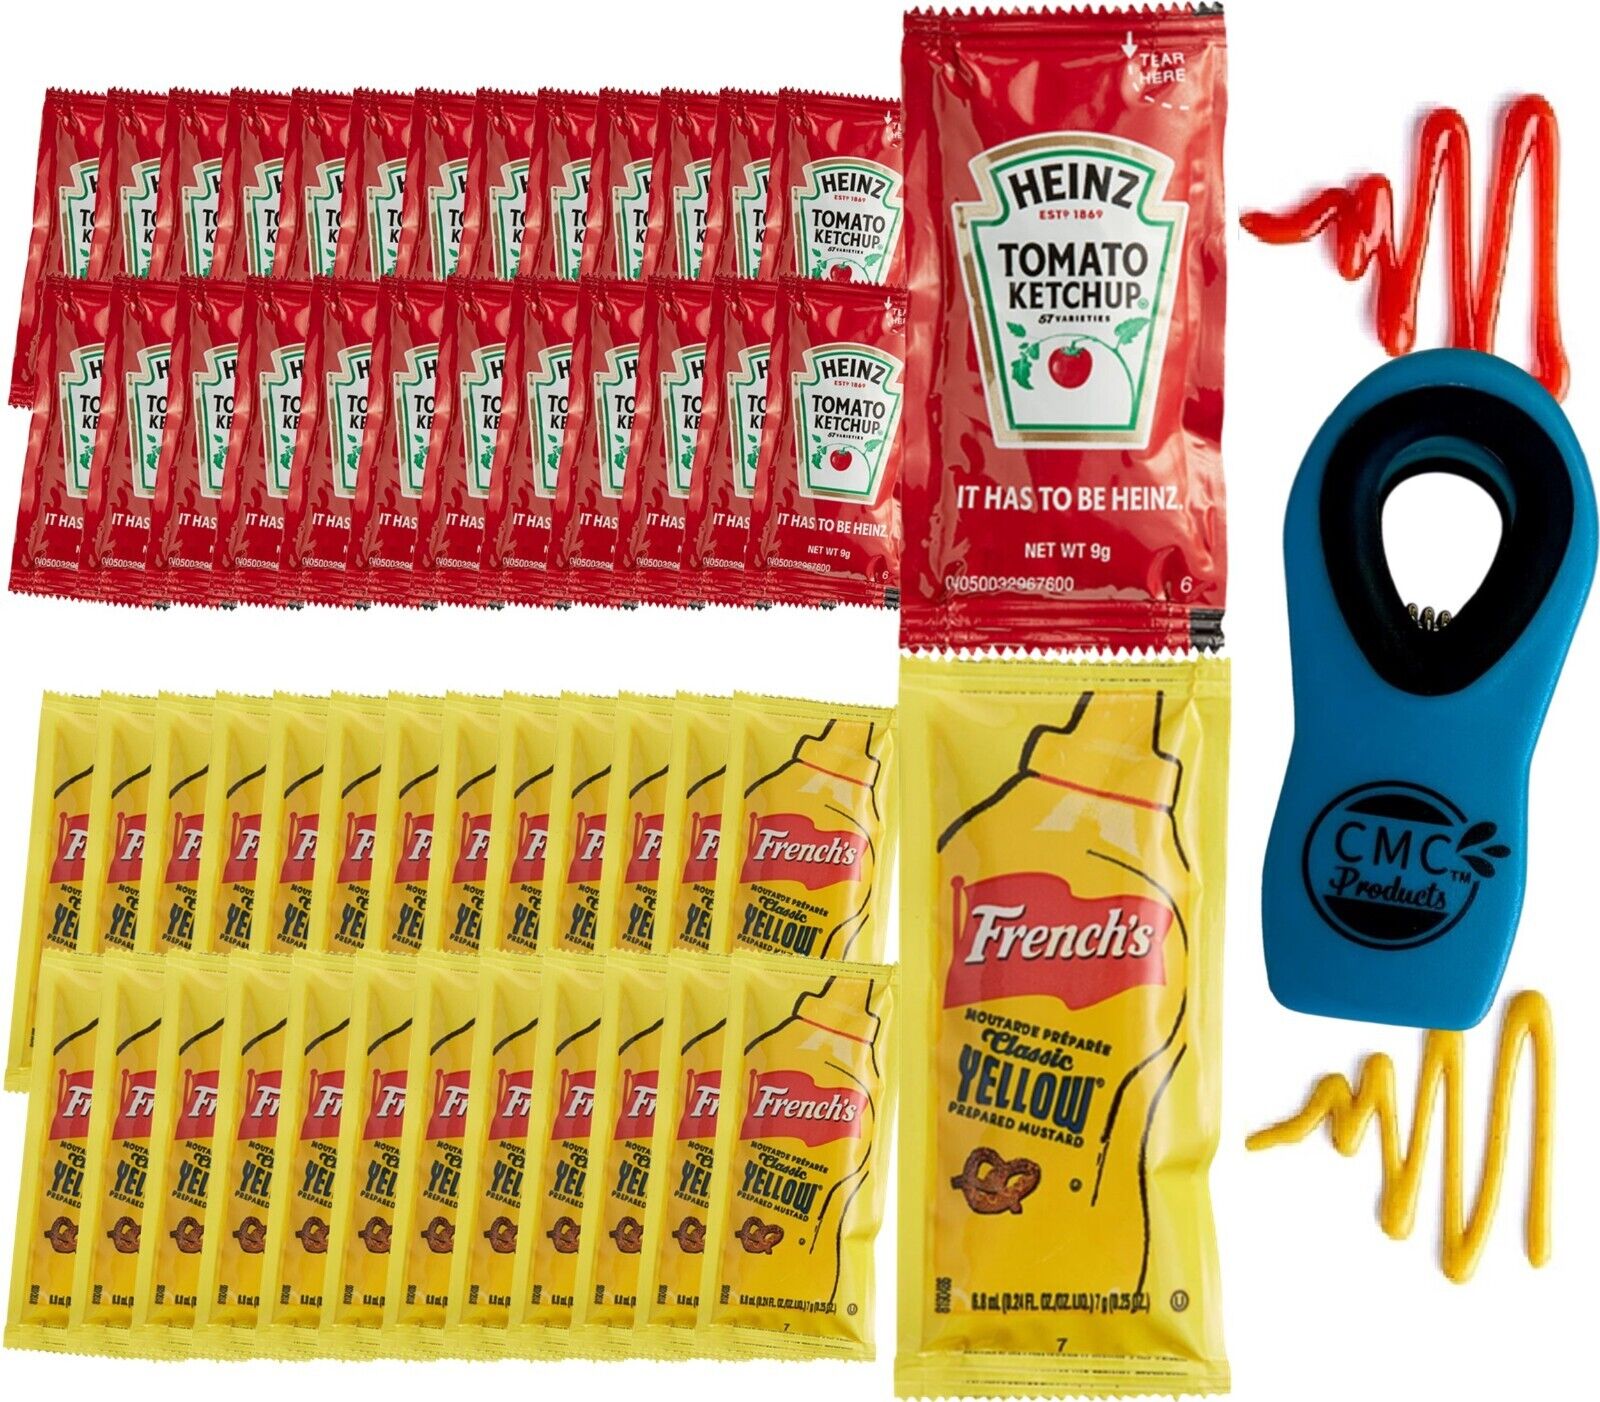 50 Total Packets/25X25 Heinz Ketchup & French's Mustard w/CMC Products Chip Clip